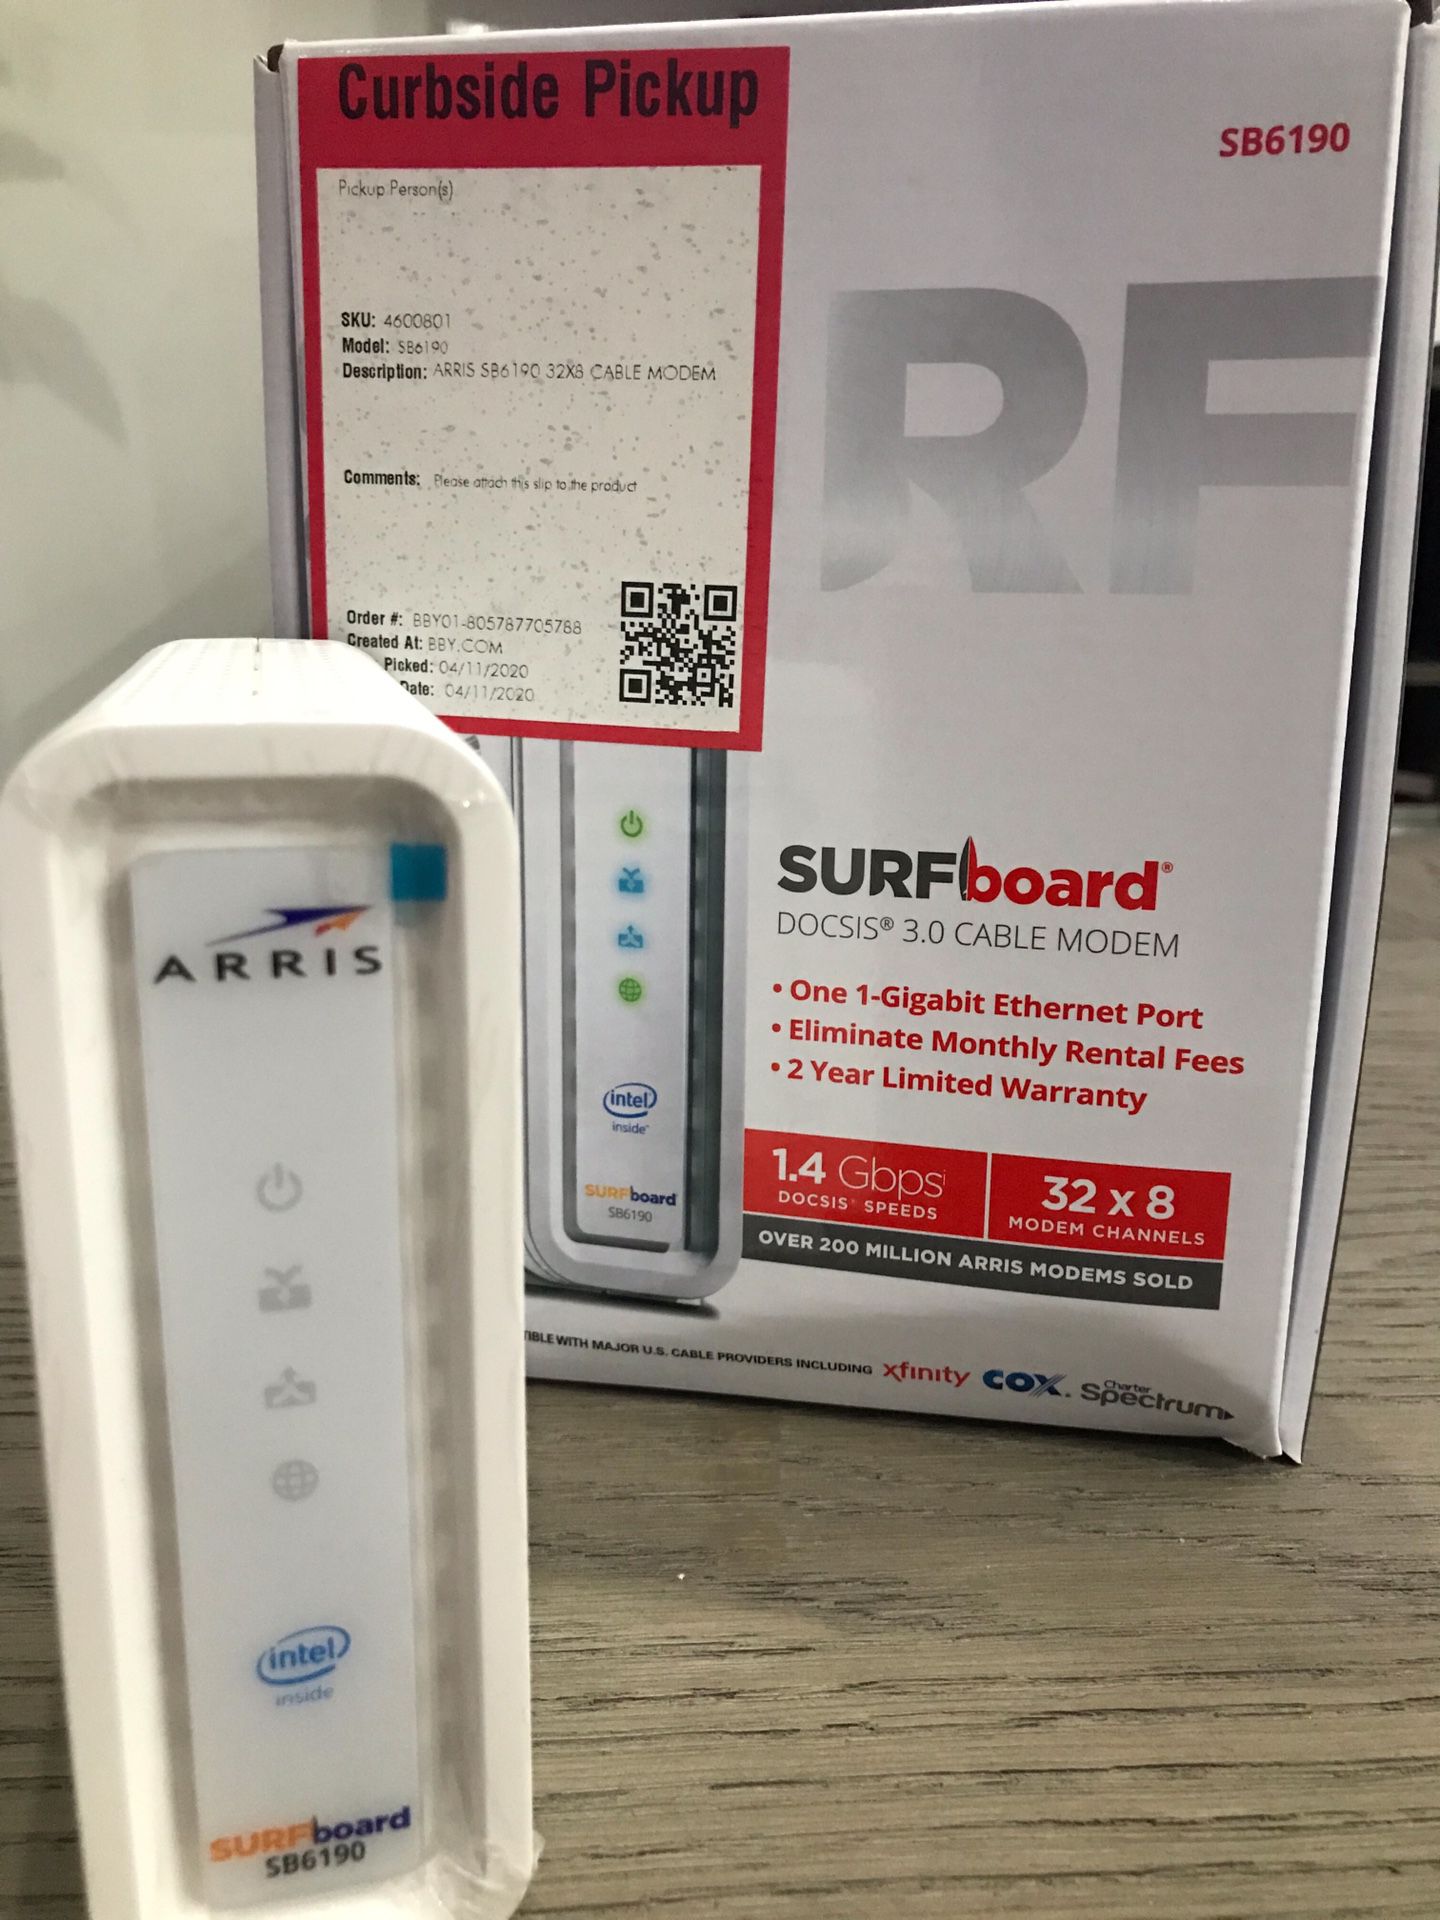 Arris Surfboard Modem - Only Purchased 6 MonthsAgo